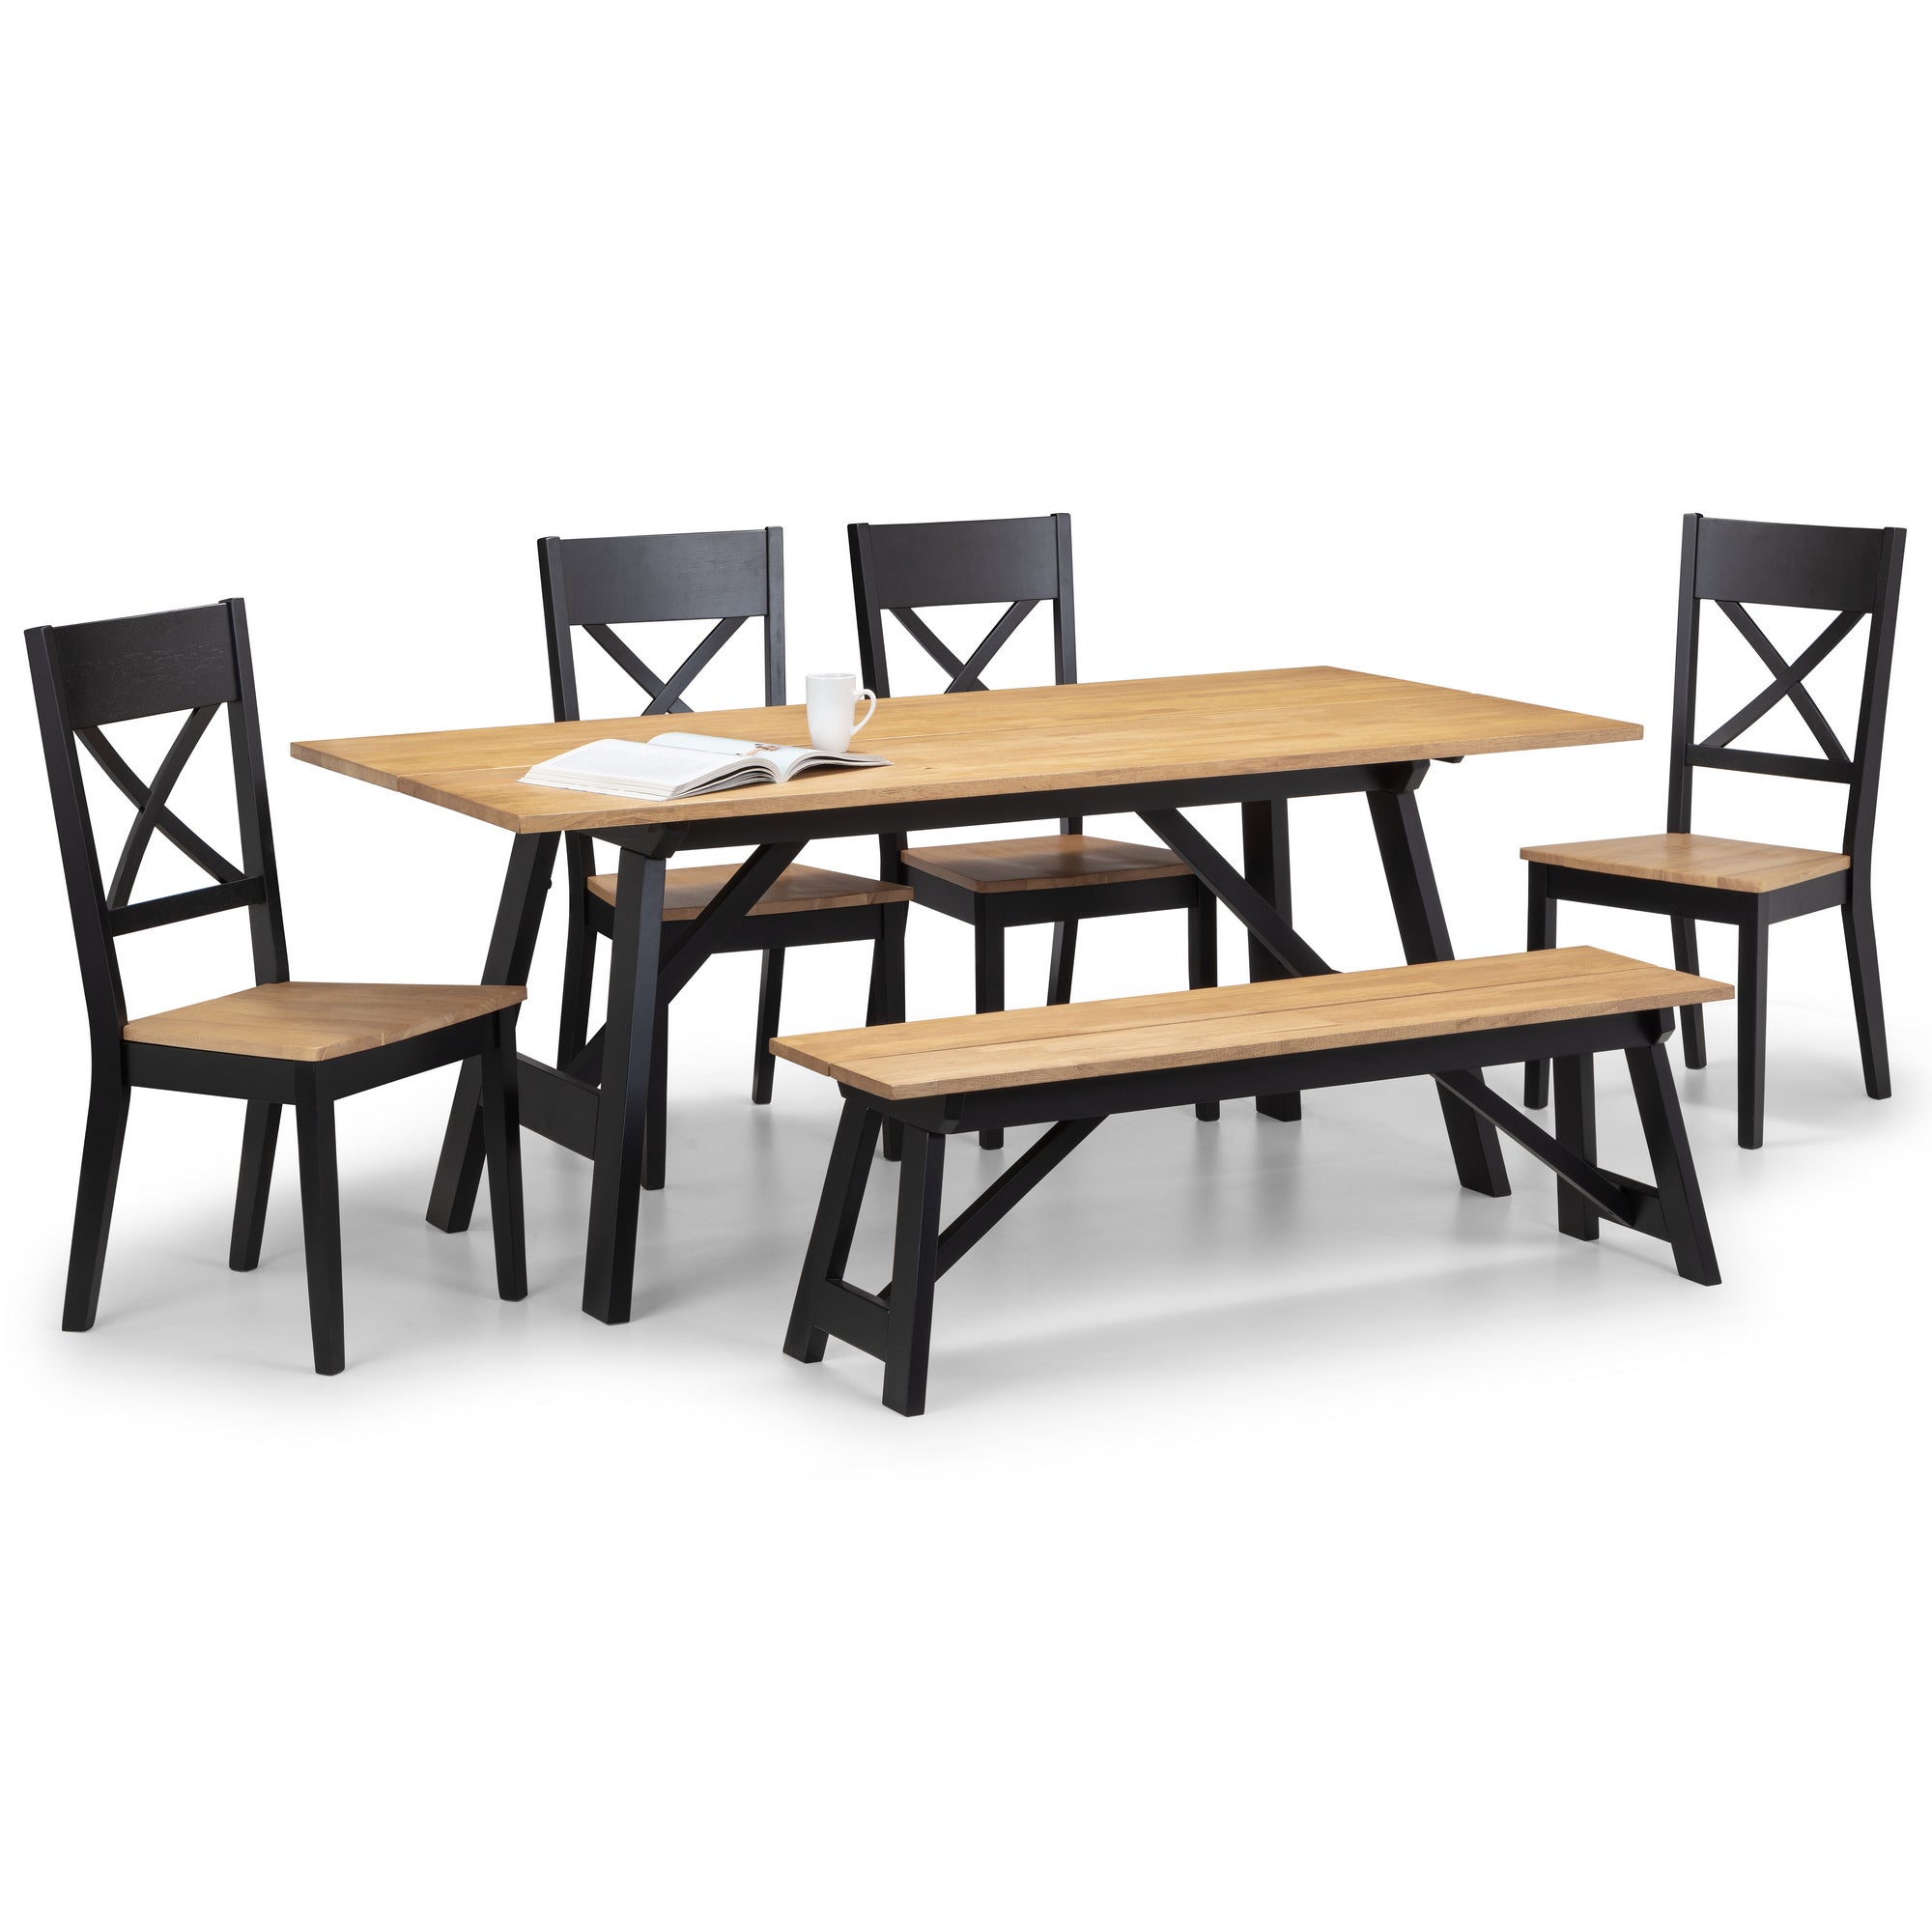 Photos - Sofa A&D Hockley Rectangular Dining Table with 4 Chairs and Bench, Black Black 